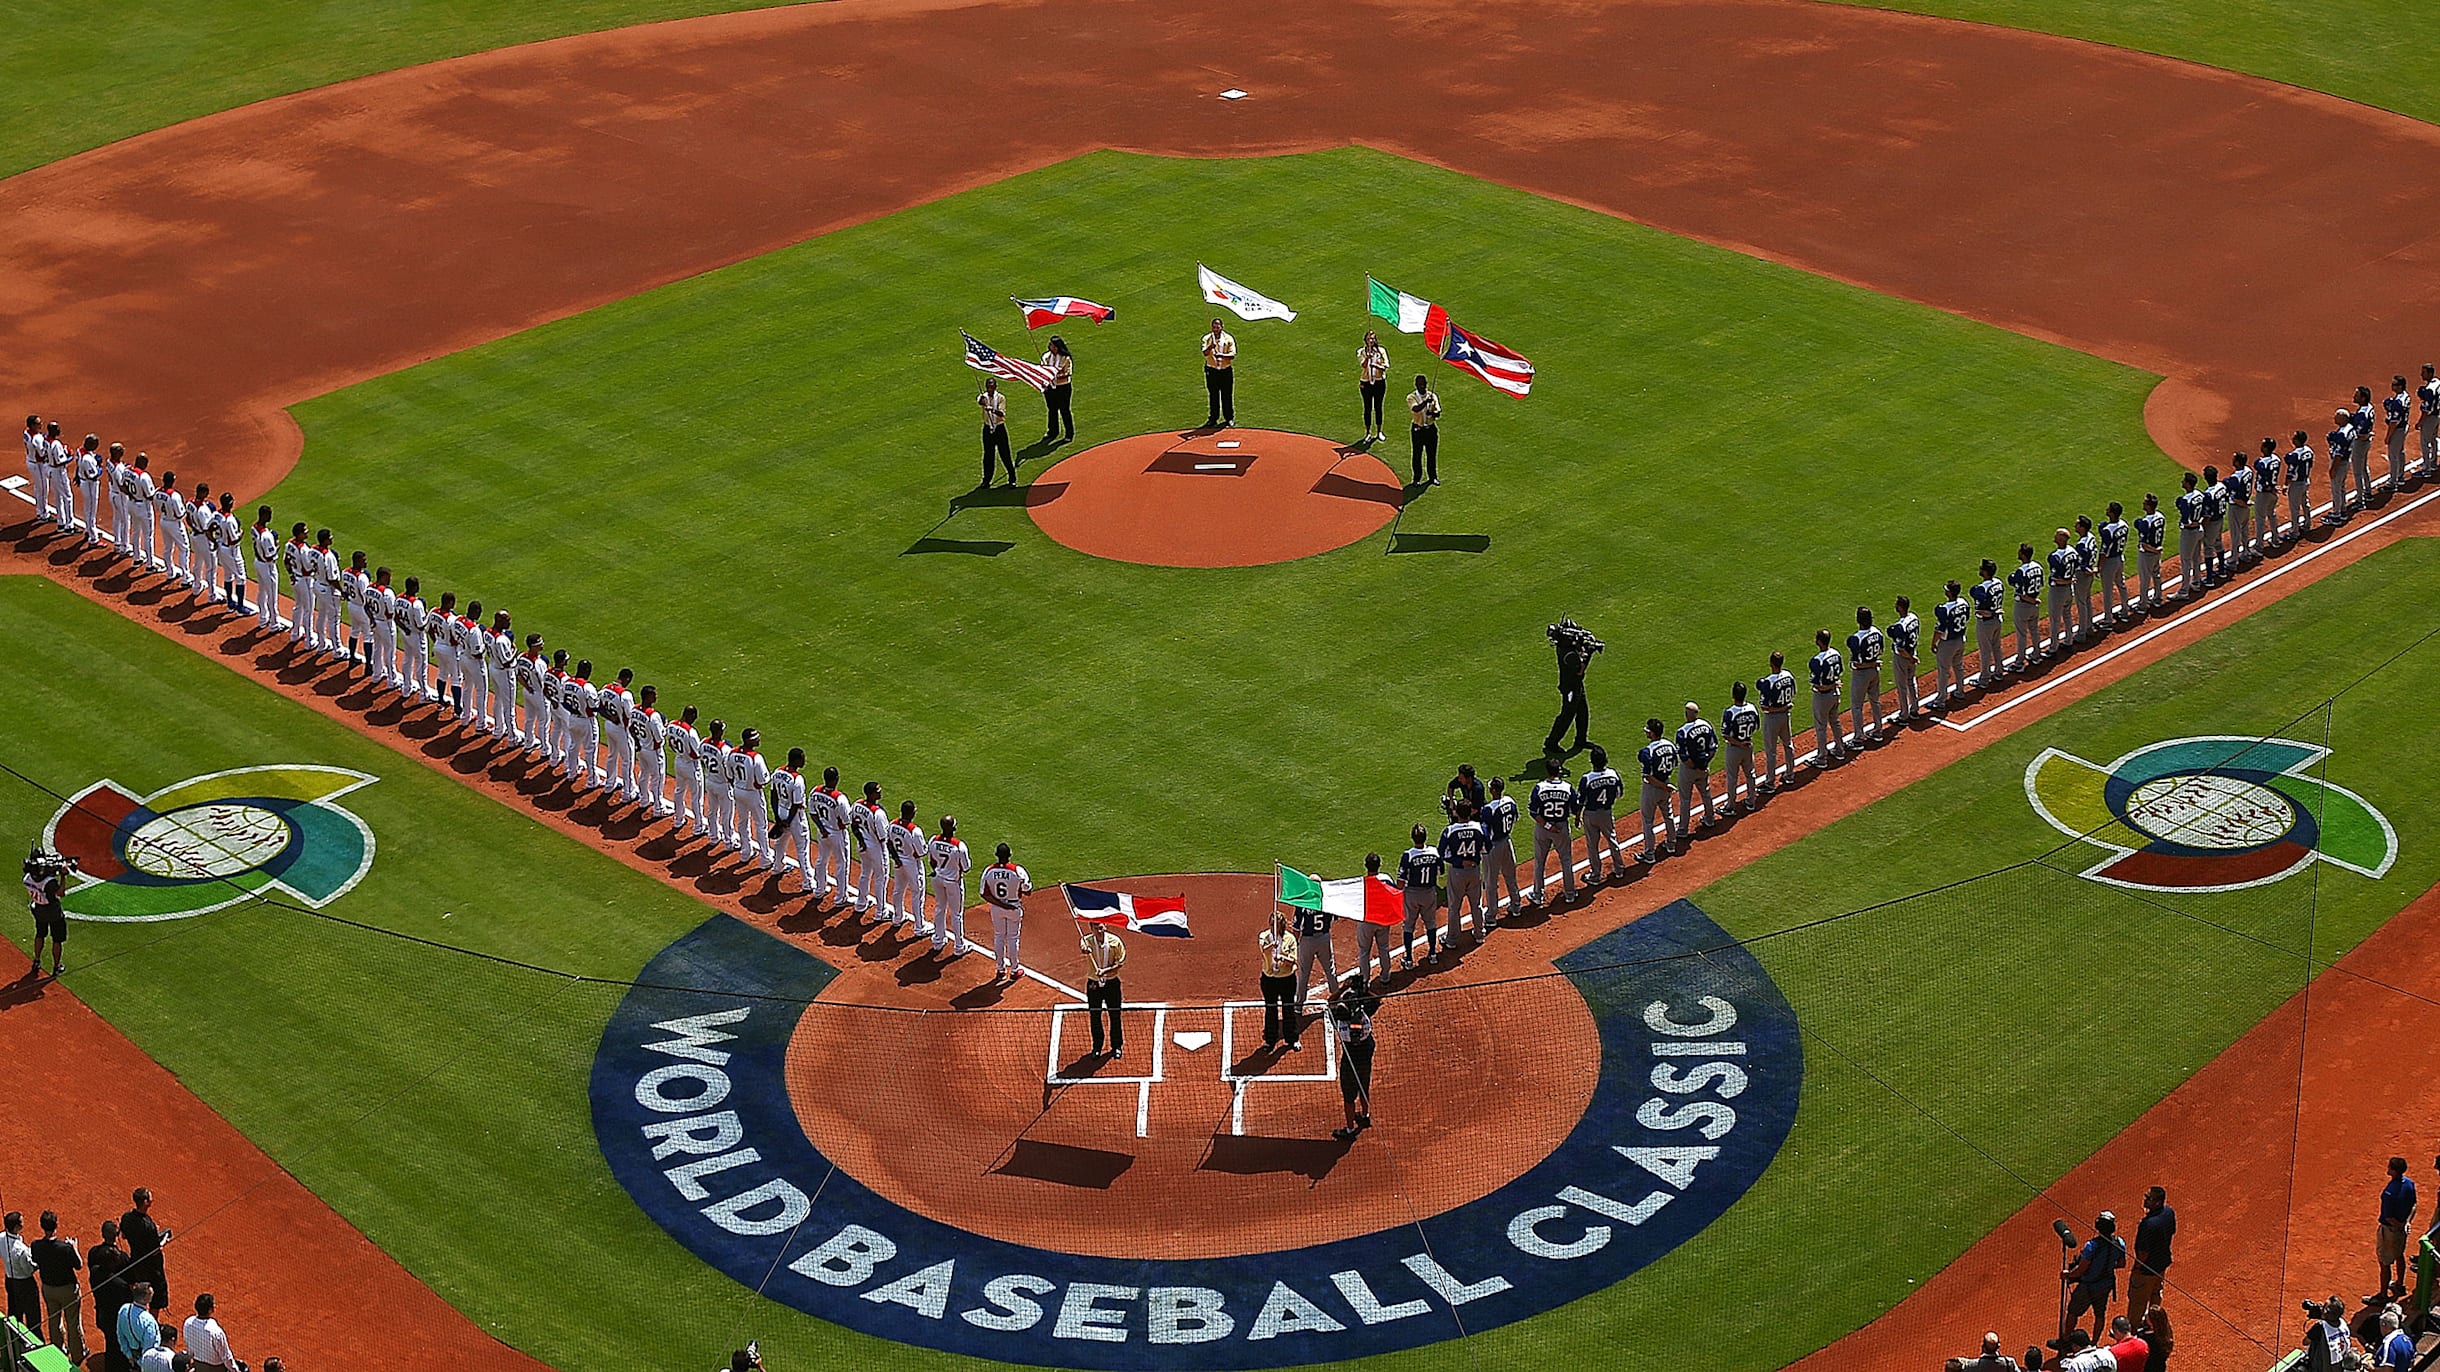 Baseball Champions League launched; First-ever professional and world-level  competition for clubs - World Baseball Softball Confederation 